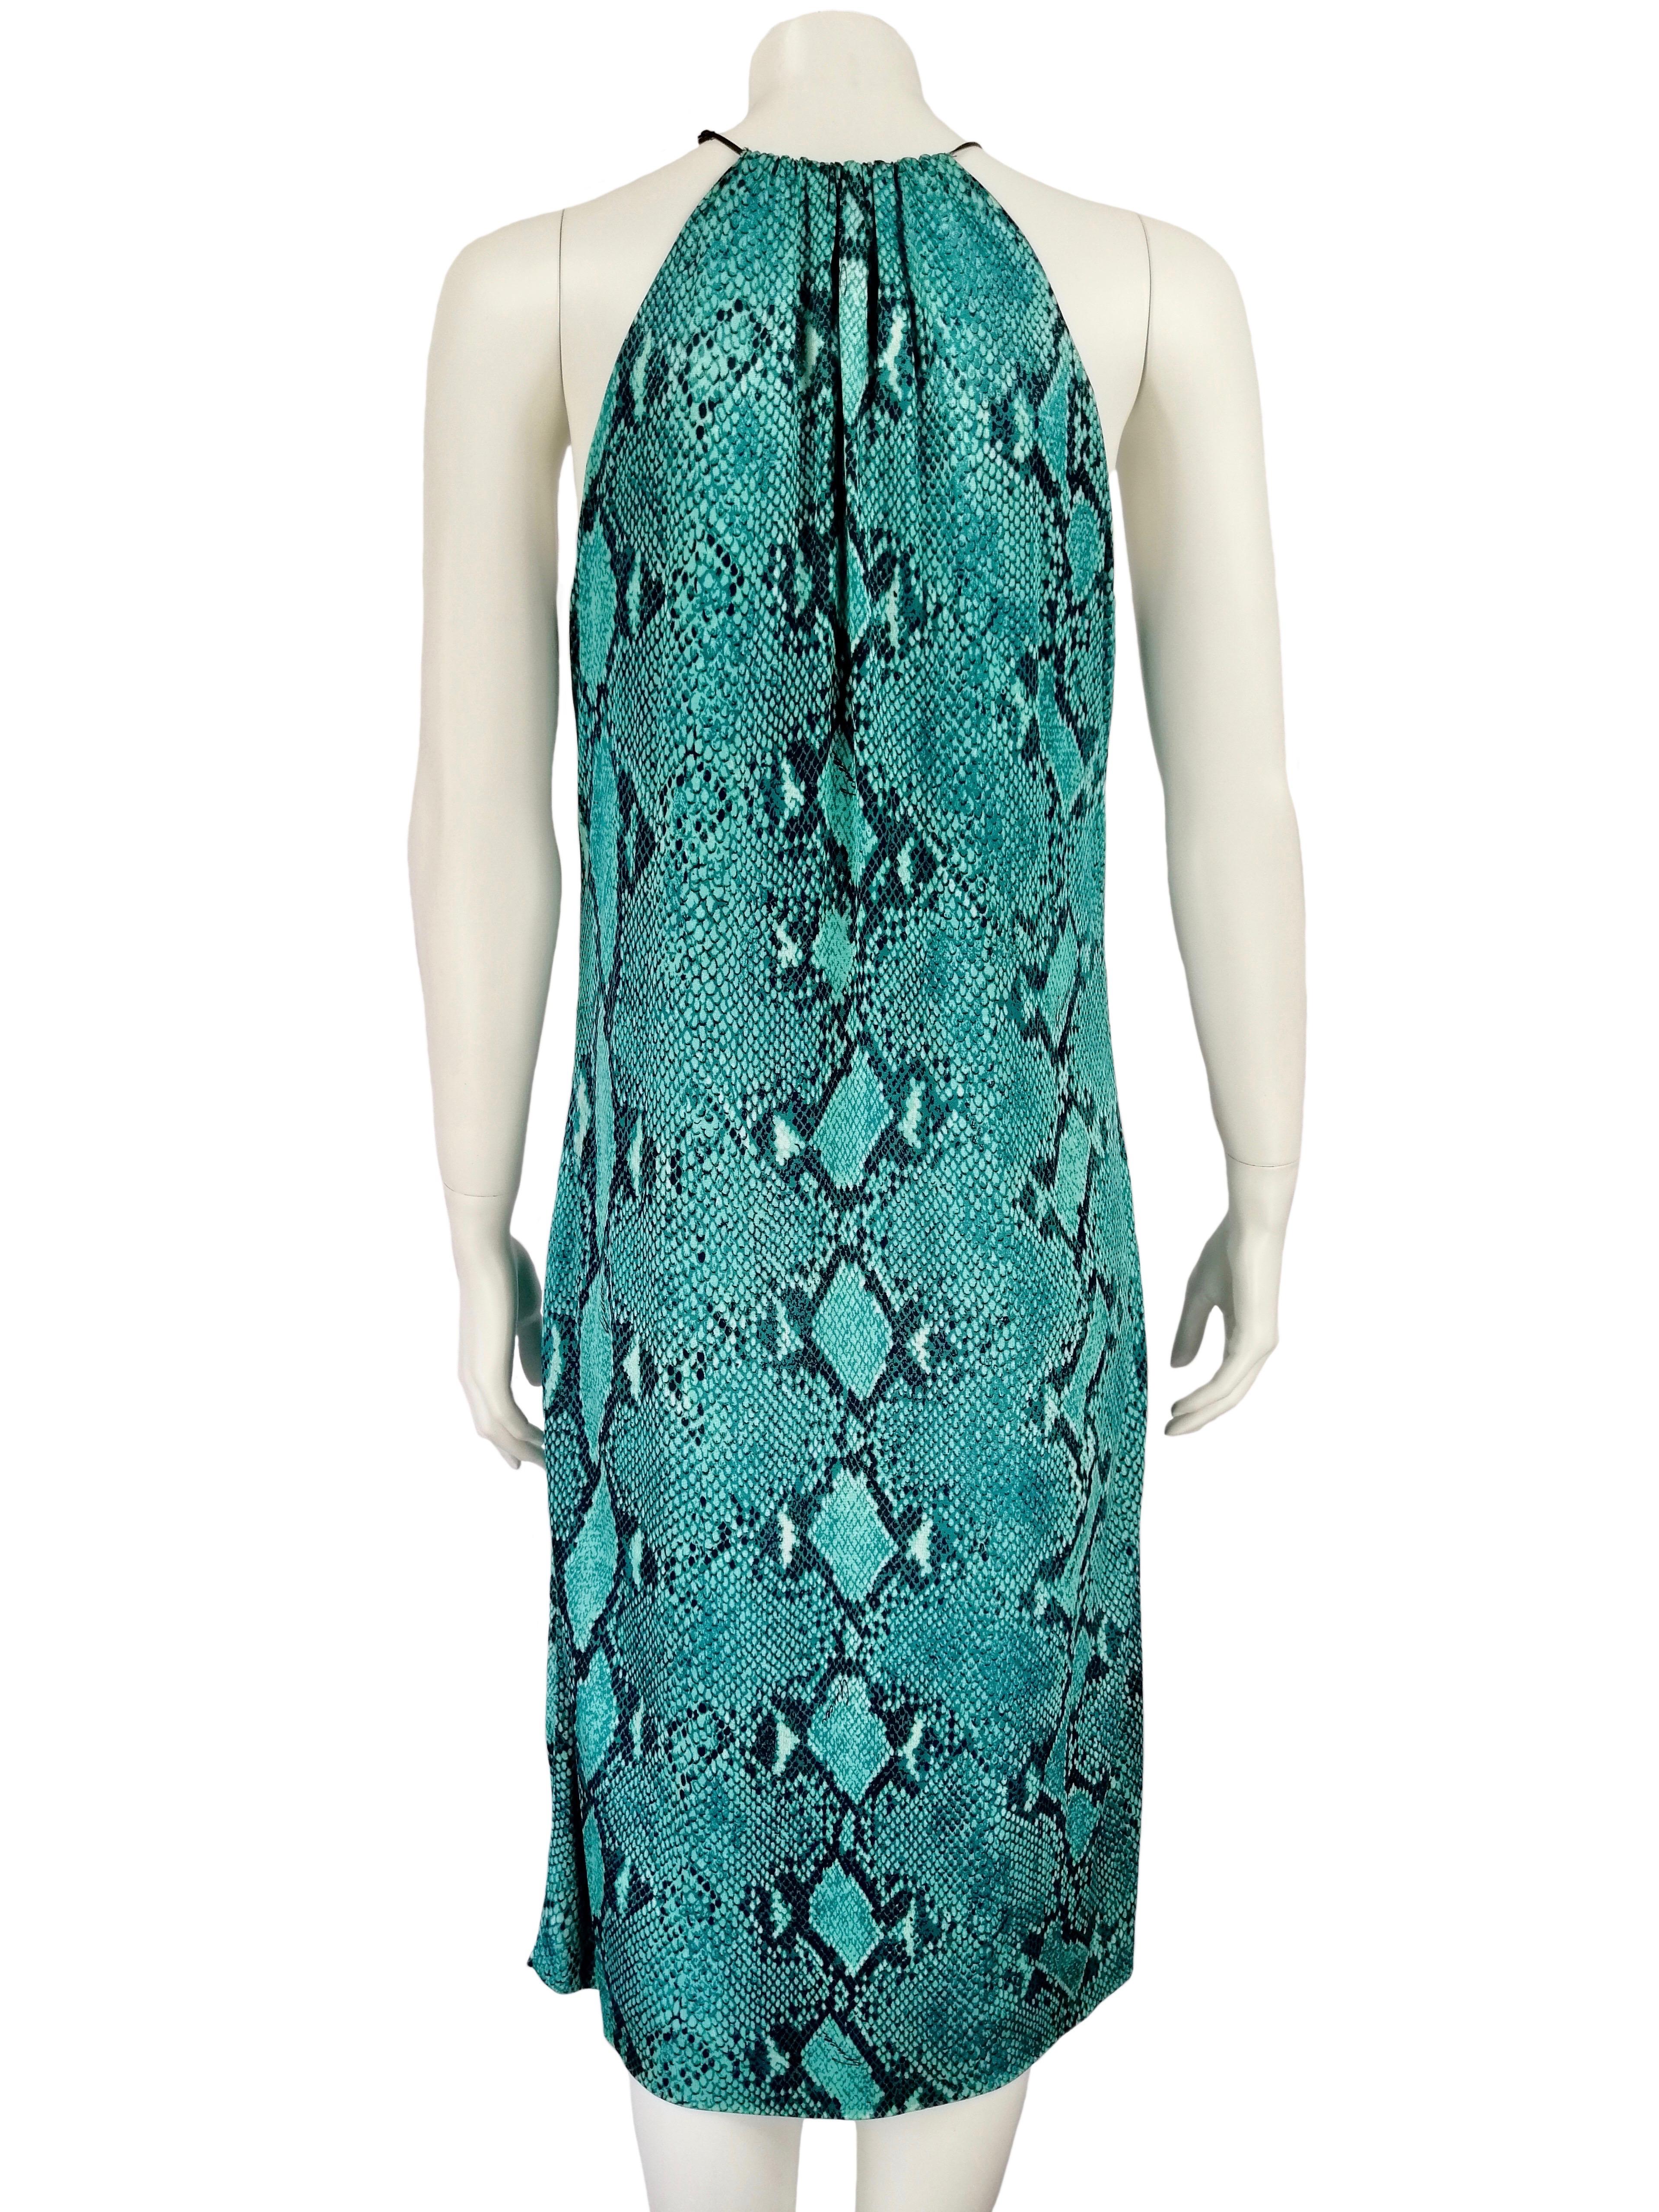 Tom Ford for Gucci python print dress SS 2000 For Sale 1